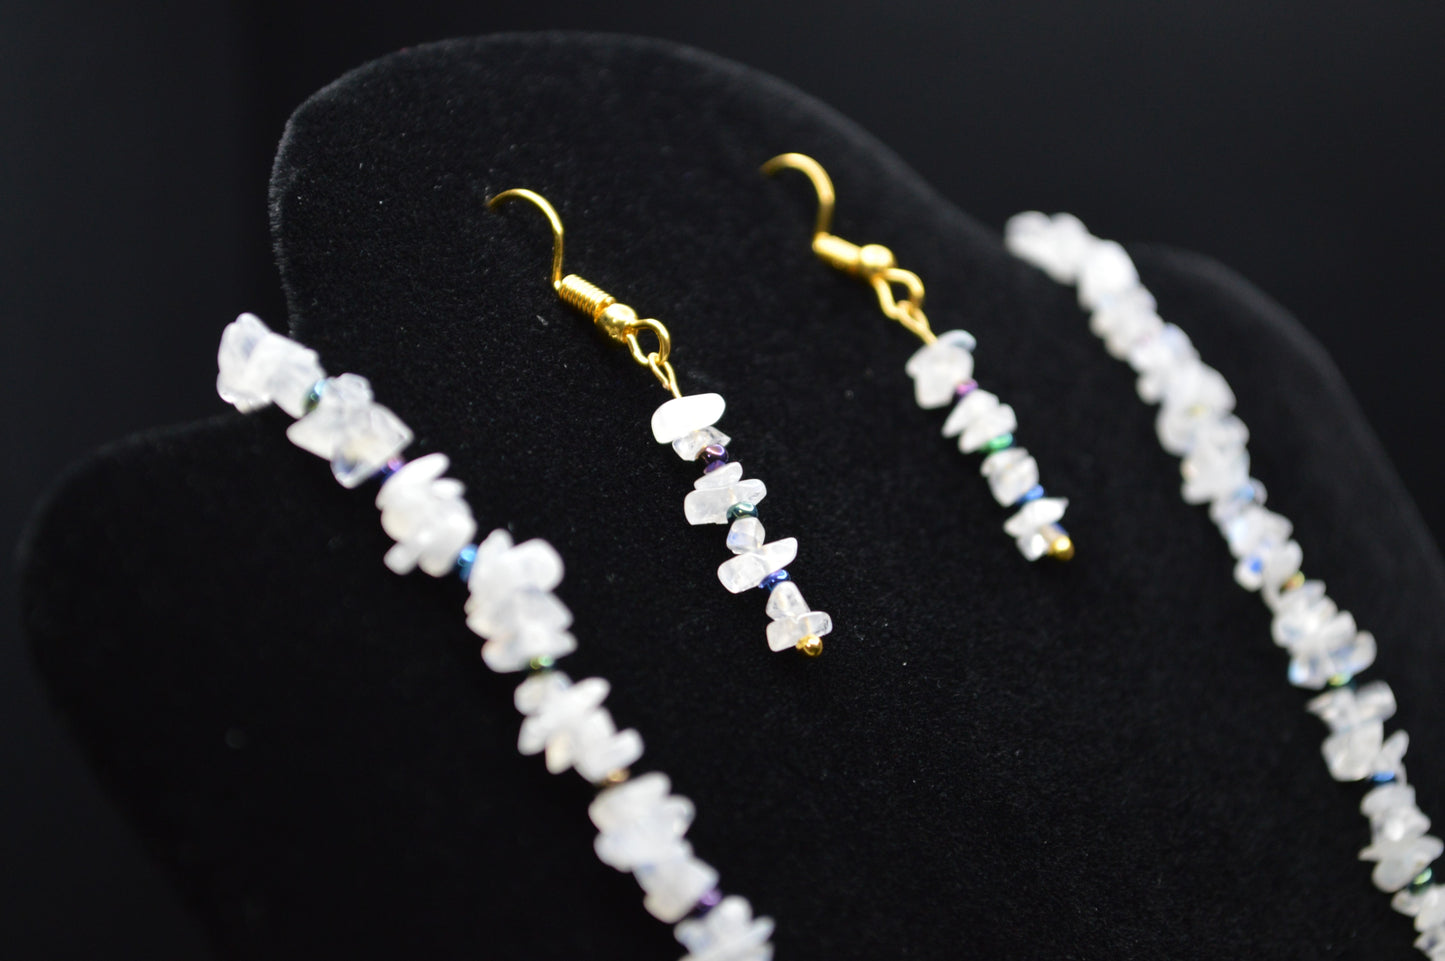 Rainbow Moonstone Necklace and Earring Set